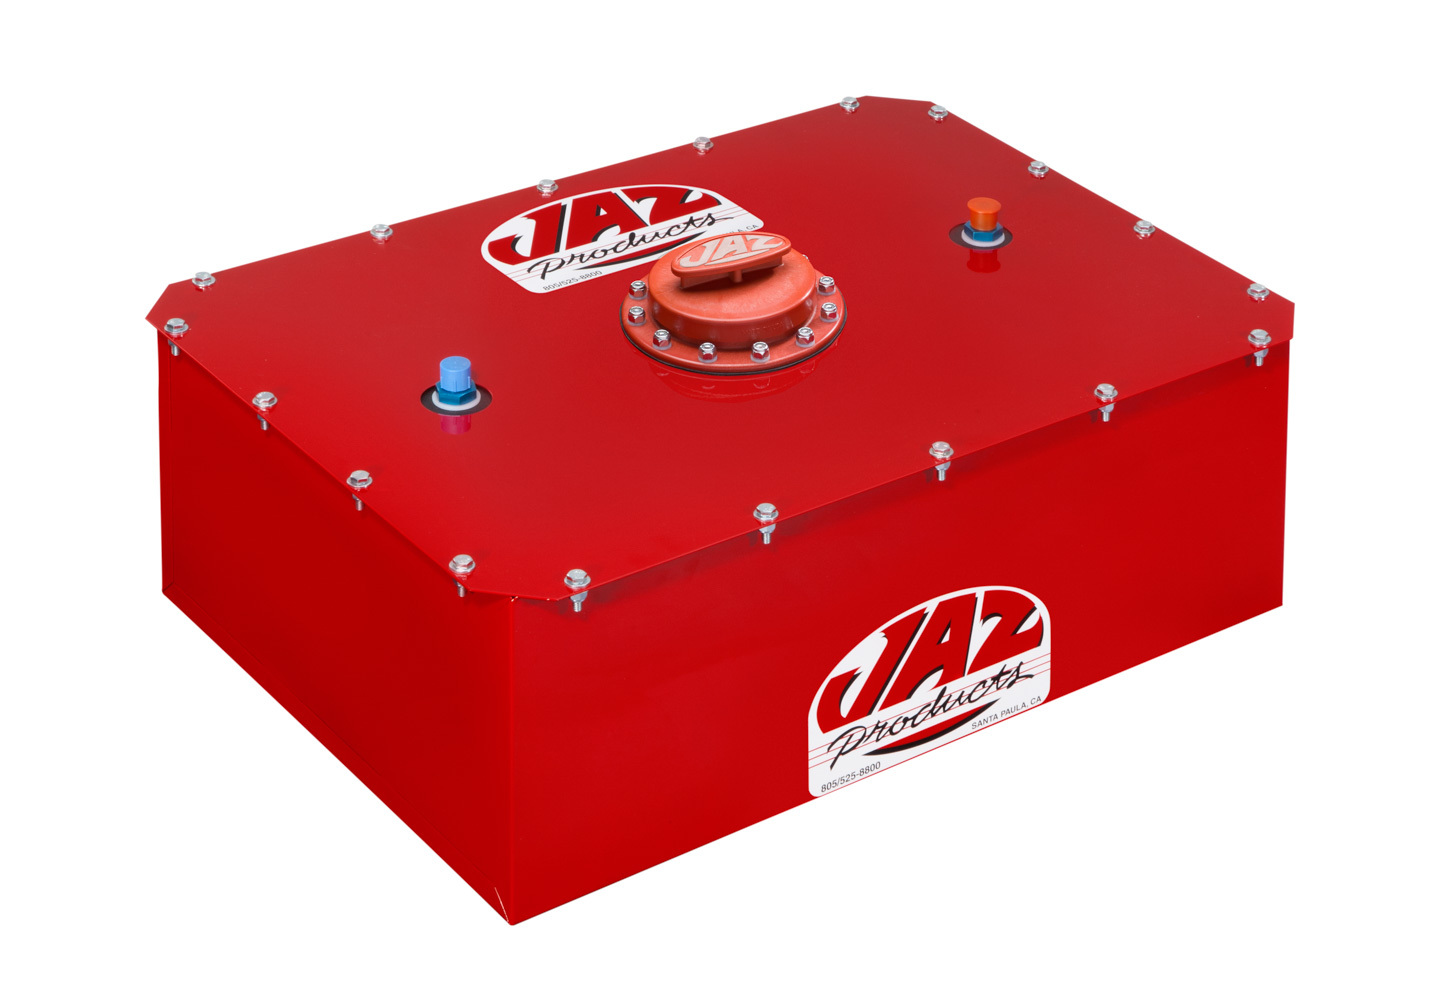 JAZ Products 270-016-06 Fuel Cell and Can, Pro Sport, 16 gal, 26 in Wide x 18 in Deep x 10 in Tall, 8 AN Outlet / Vent, Foam, Steel, Red Powder Coat, Each